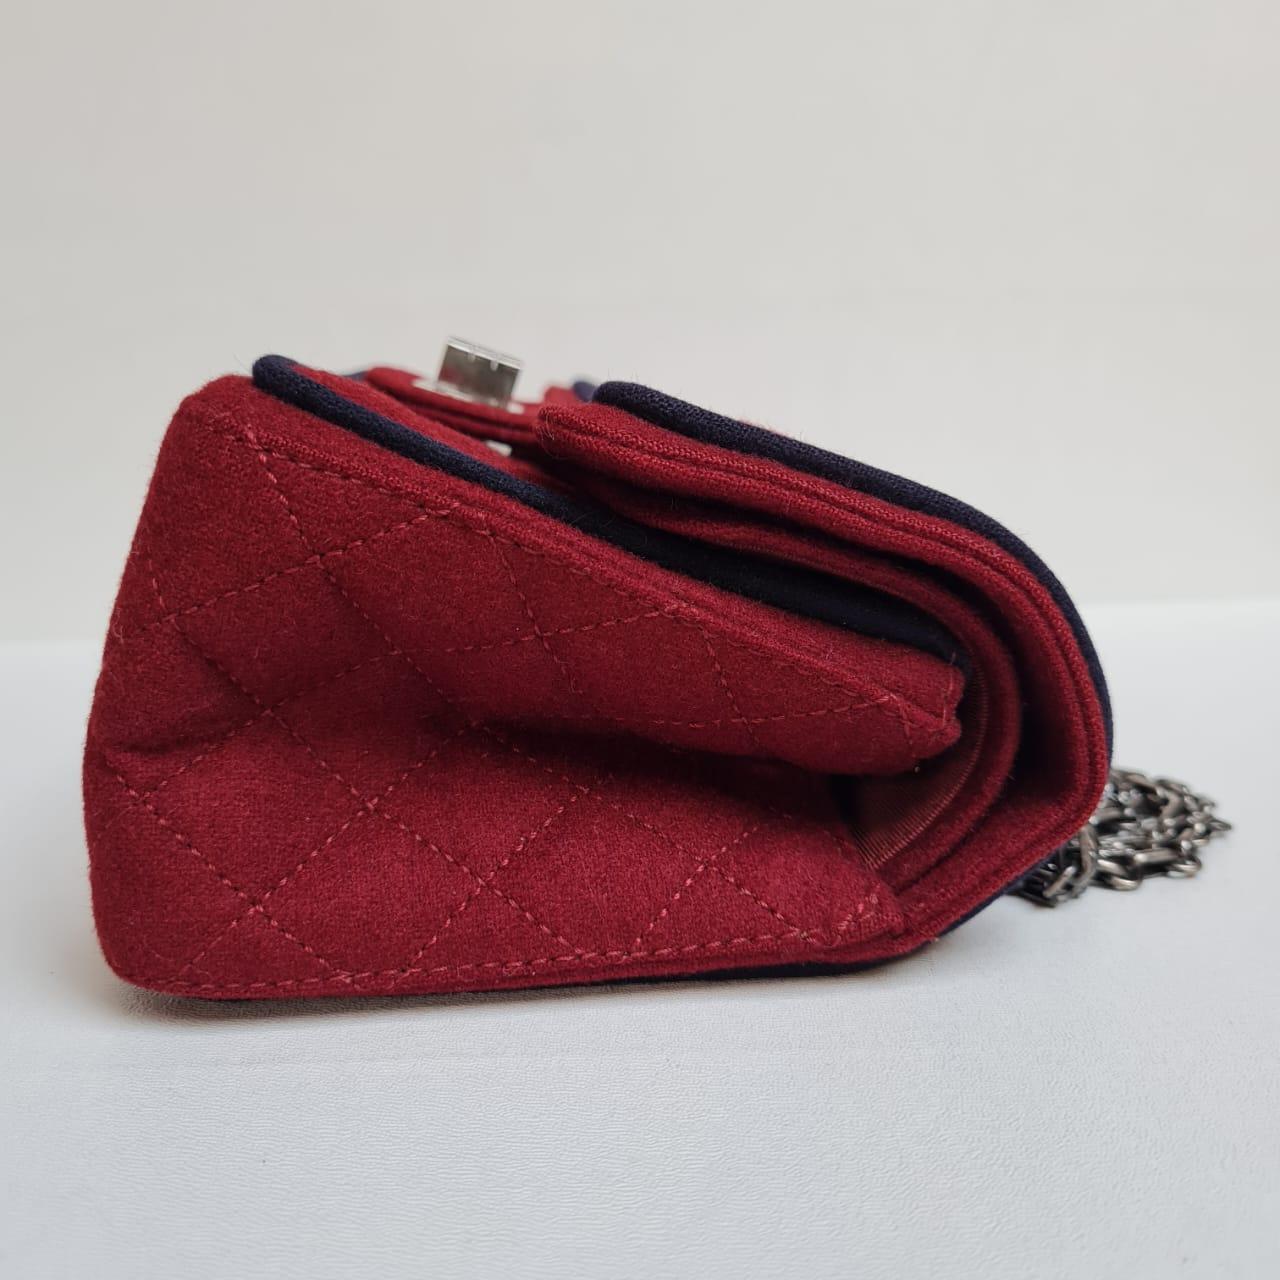 Chanel 2015 Red Edelweiss Reissue Wool Flap Bag For Sale 4